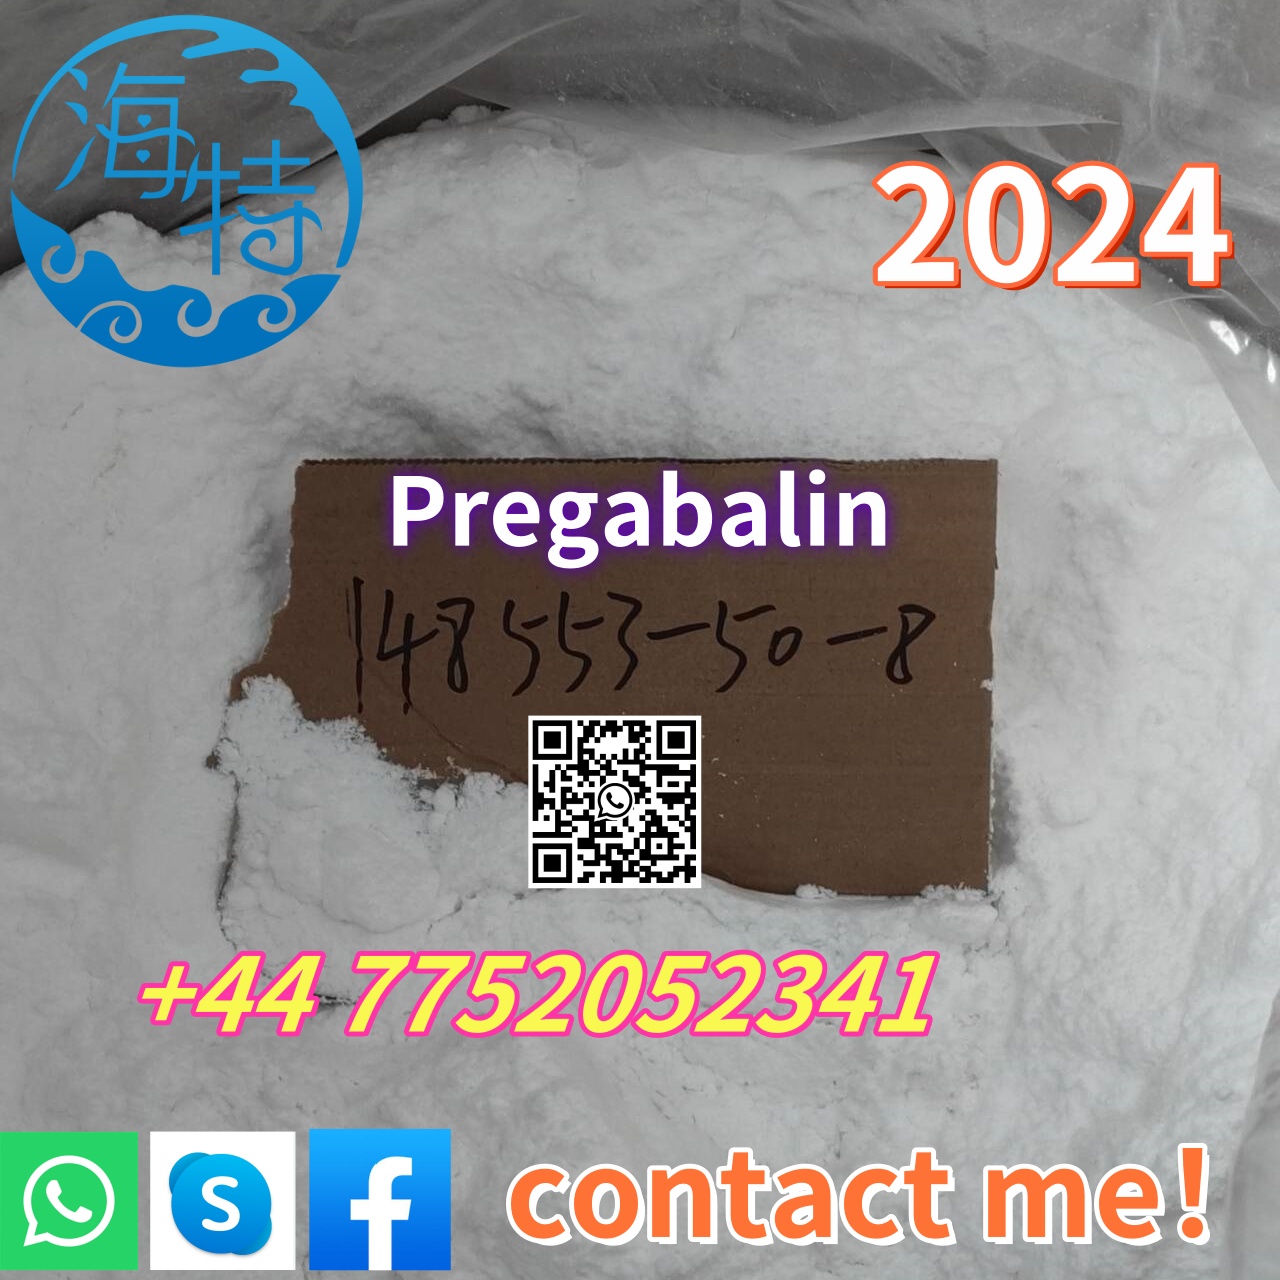   Agent shipping from China to West Malaysia by air and sea door to do,1/F,NO 32, Xi peng ling Lu, Hebian ,Helong street,Baiyun District, Guangzhou, China,Services,Free Classifieds,Post Free Ads,77traders.com